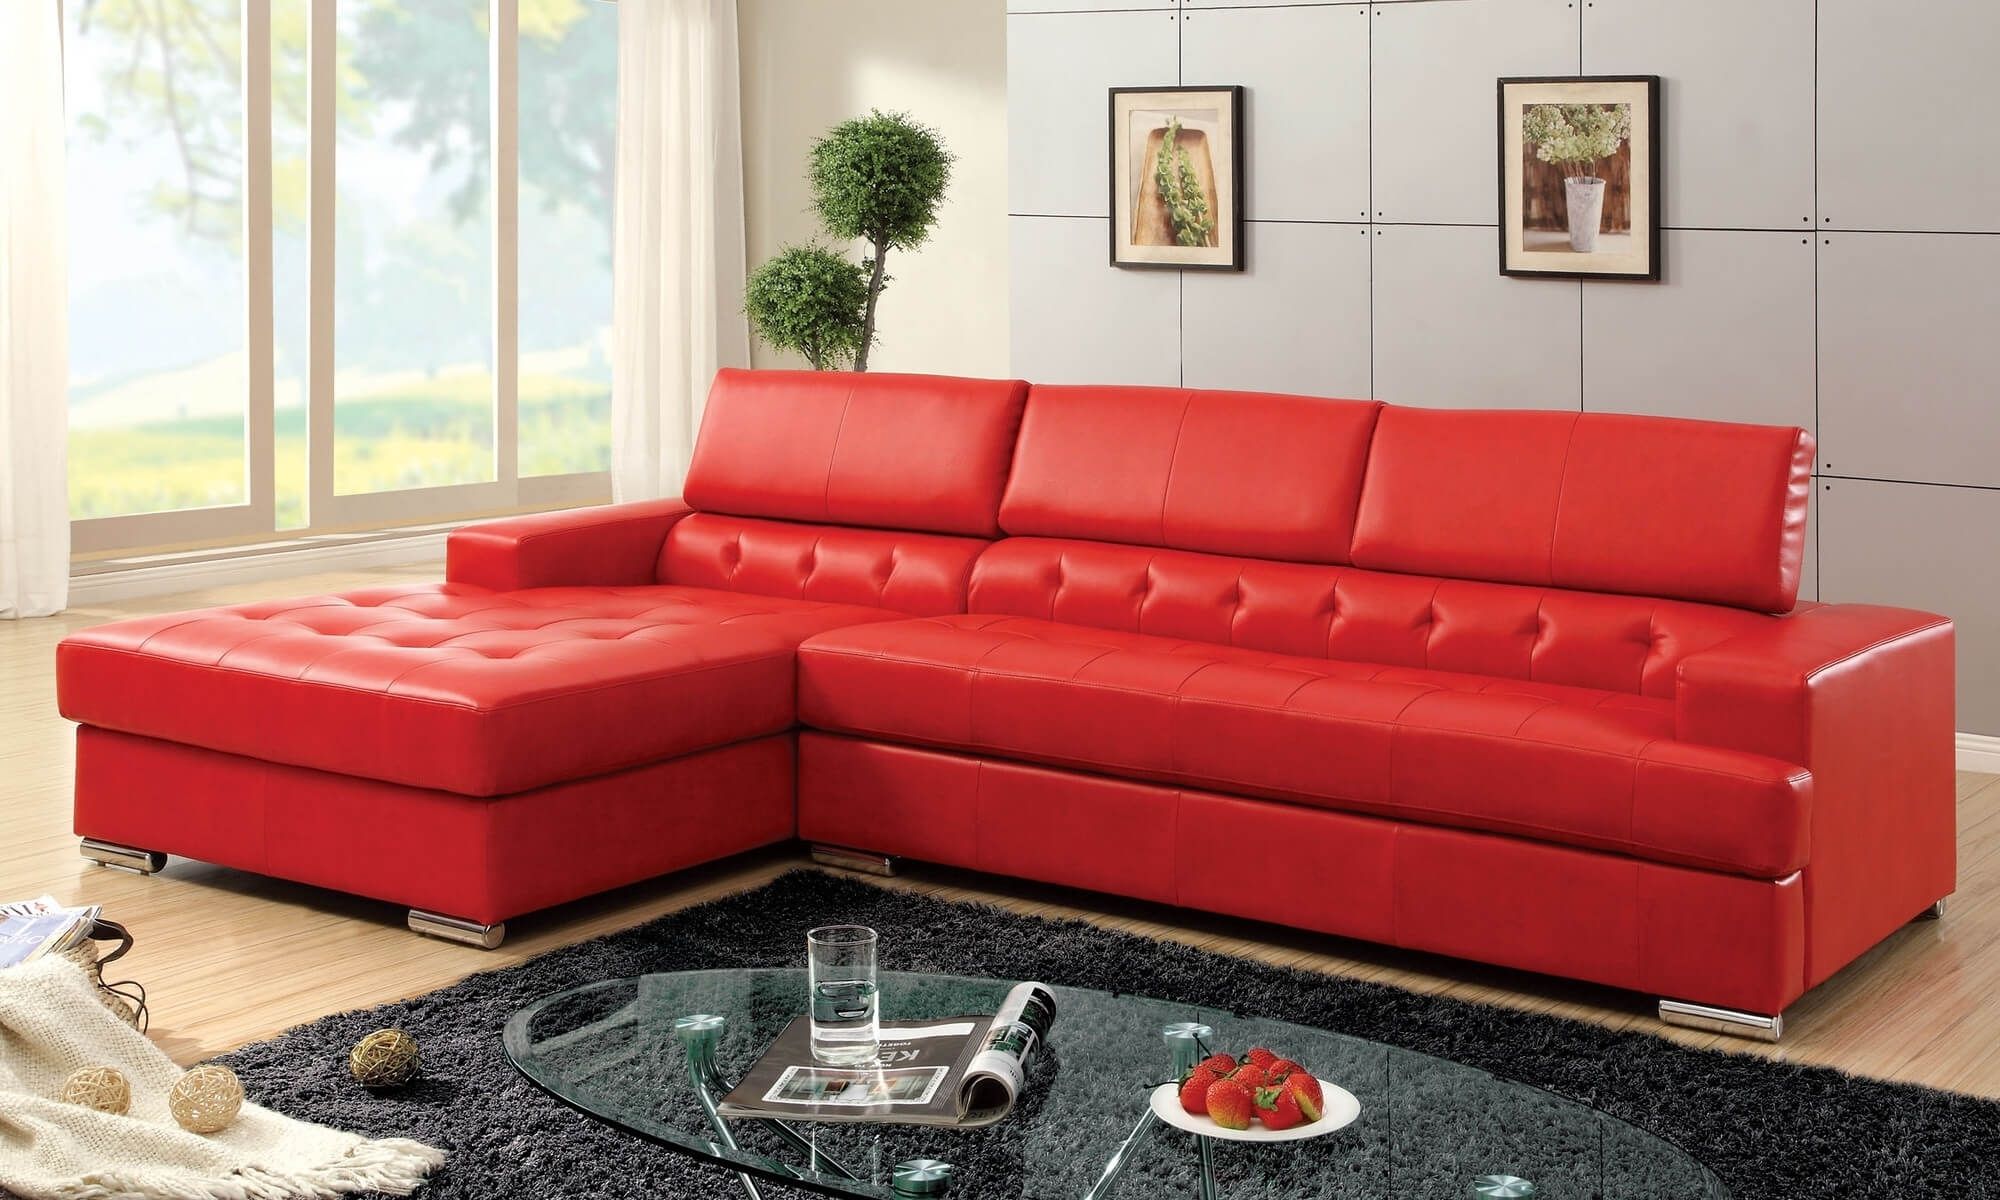 red leather sectional sleeper sofa set